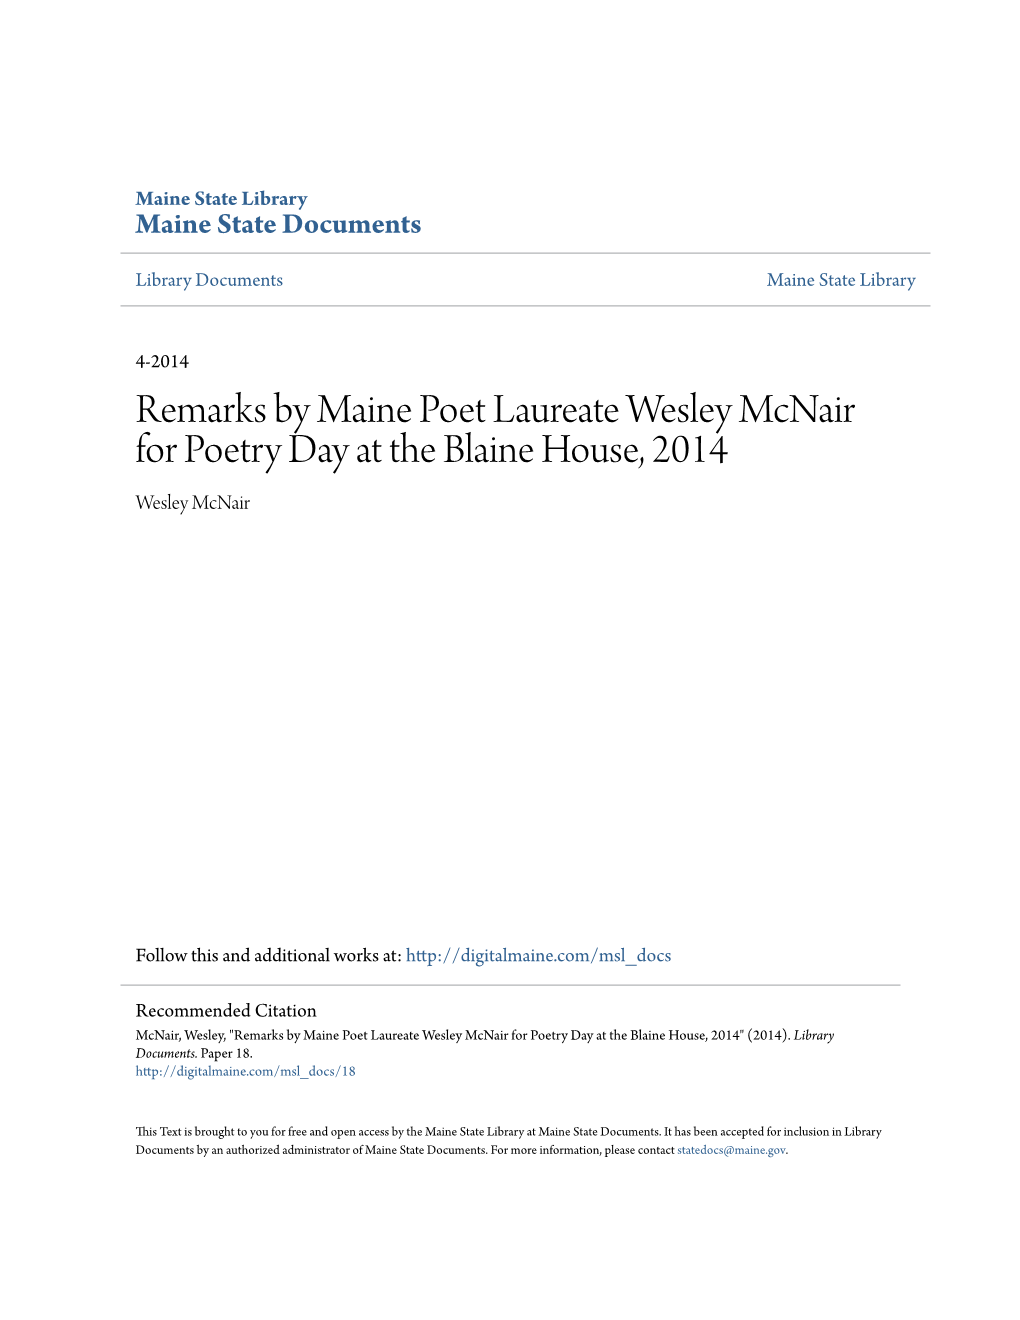 Remarks by Maine Poet Laureate Wesley Mcnair for Poetry Day at the Blaine House, 2014 Wesley Mcnair